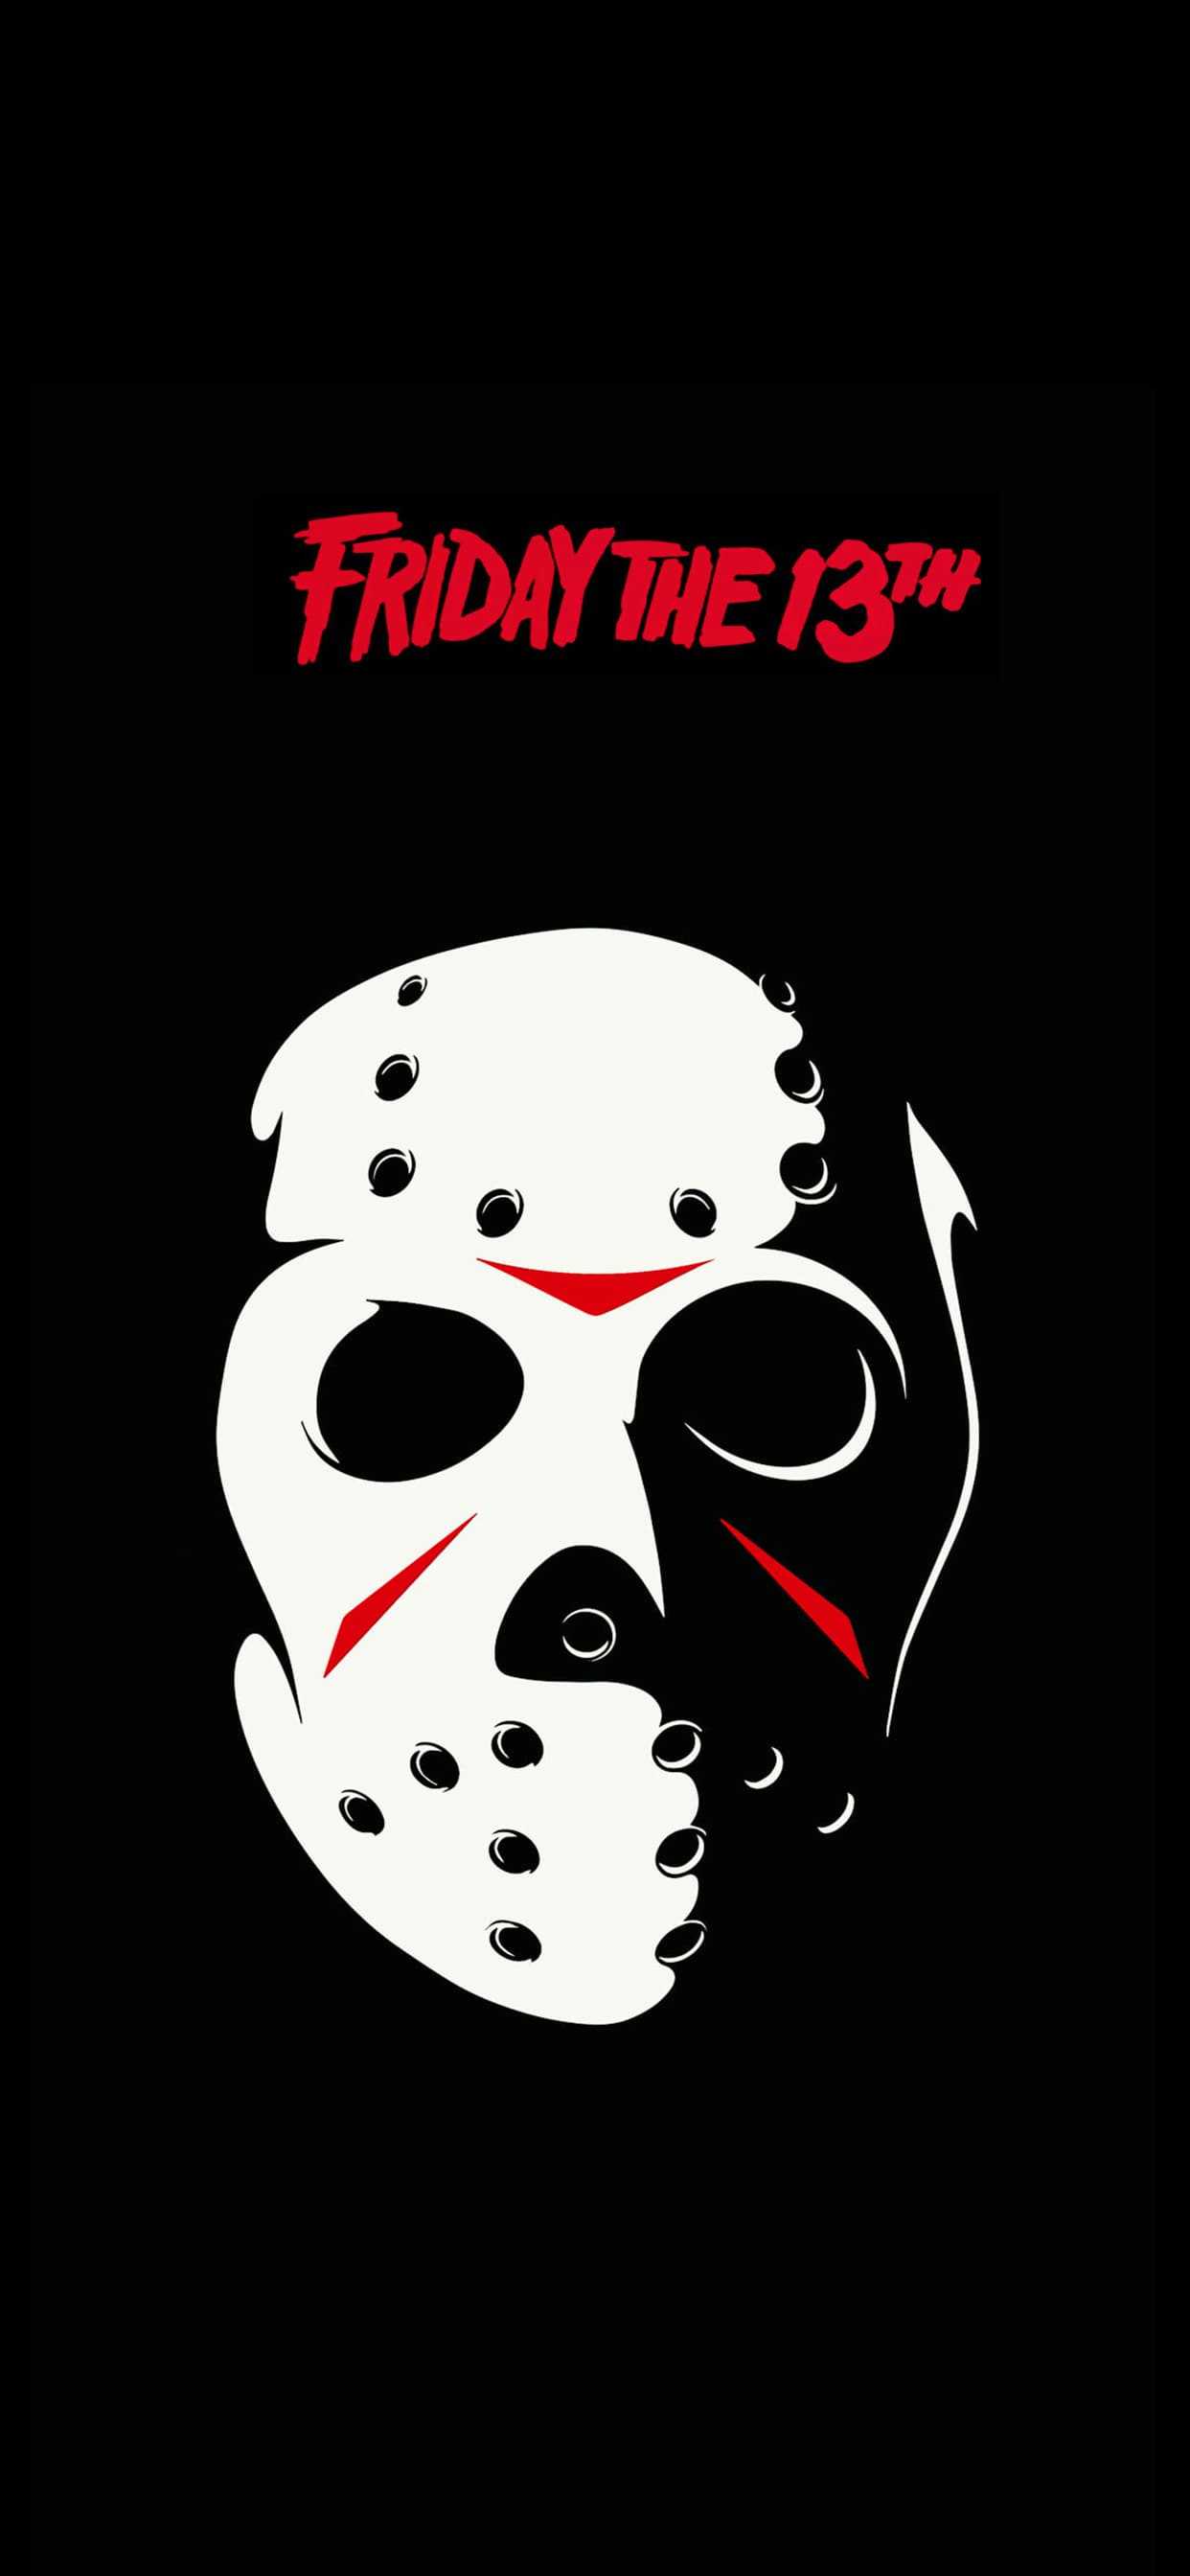 Friday The 13th Wallpaper - iXpap